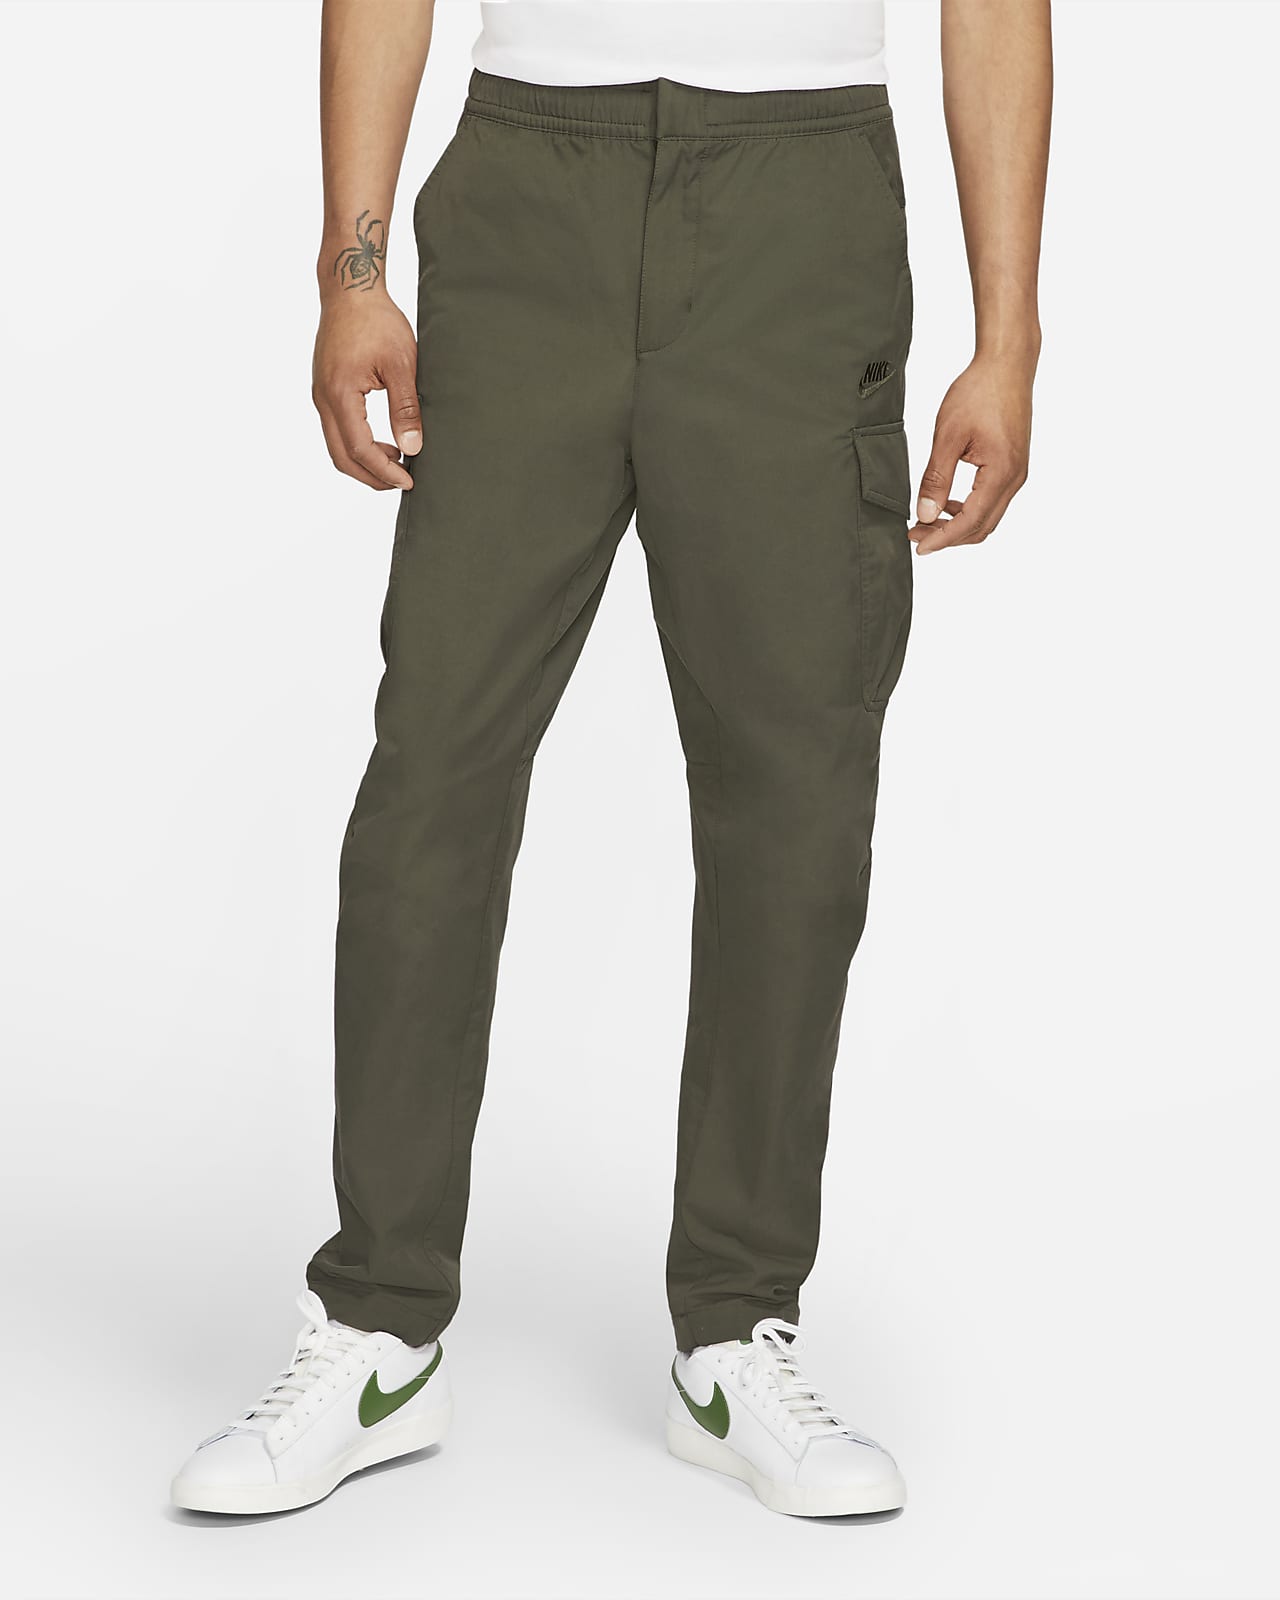 Cargo trousers - Anthracite grey - Men | H&M IN